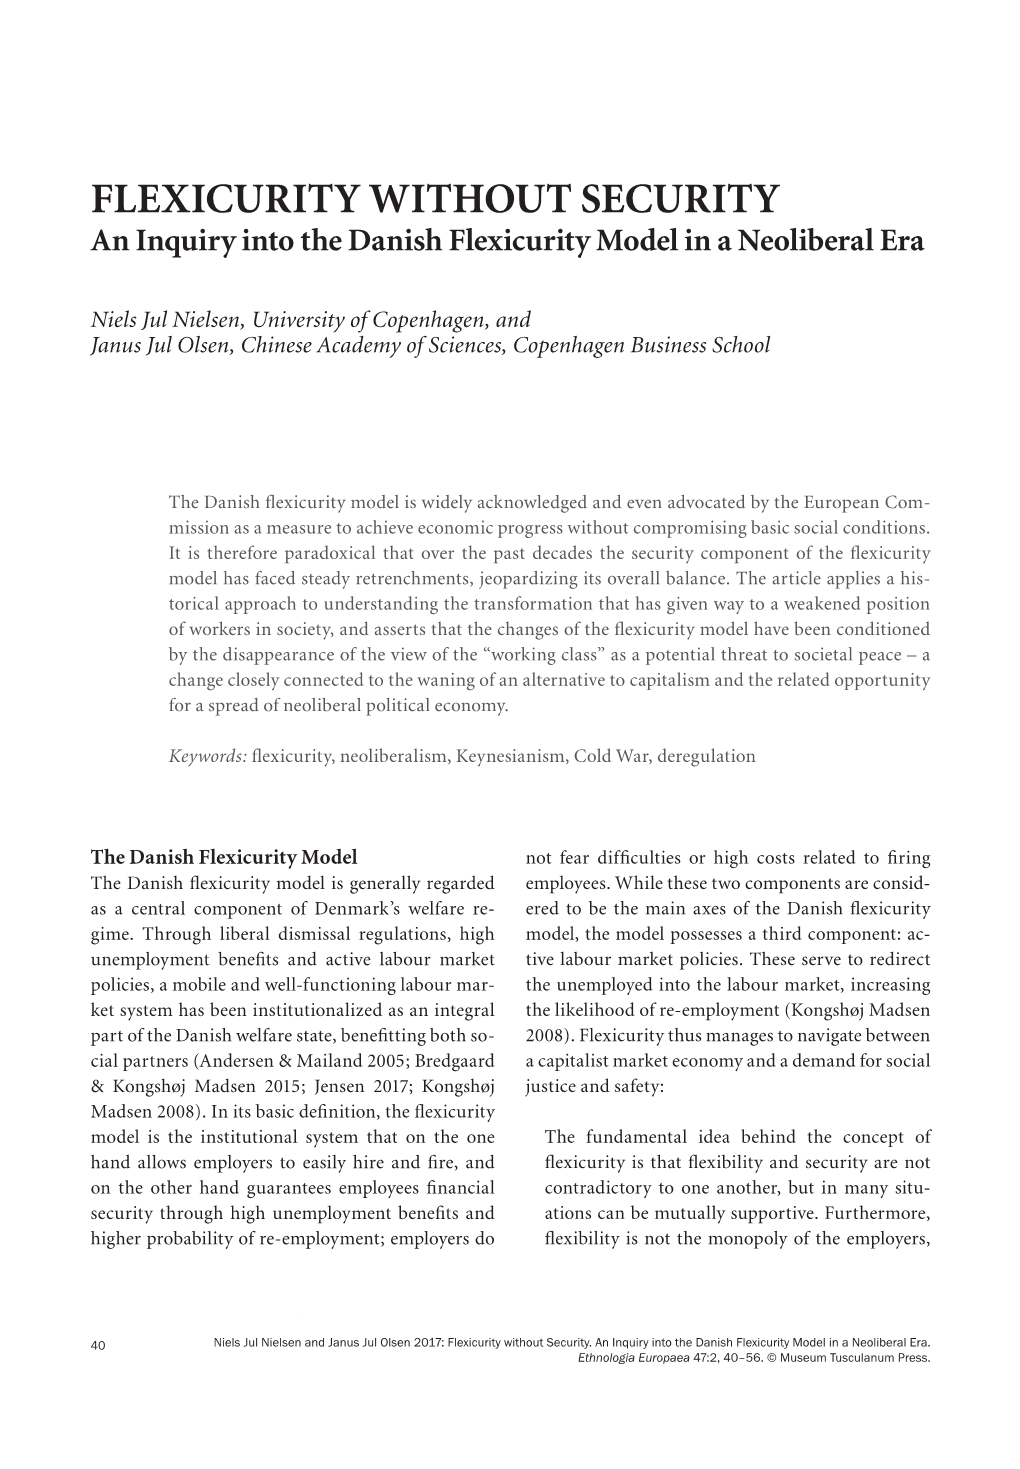 FLEXICURITY WITHOUT SECURITY an Inquiry Into the Danish Flexicurity Model in a Neoliberal Era